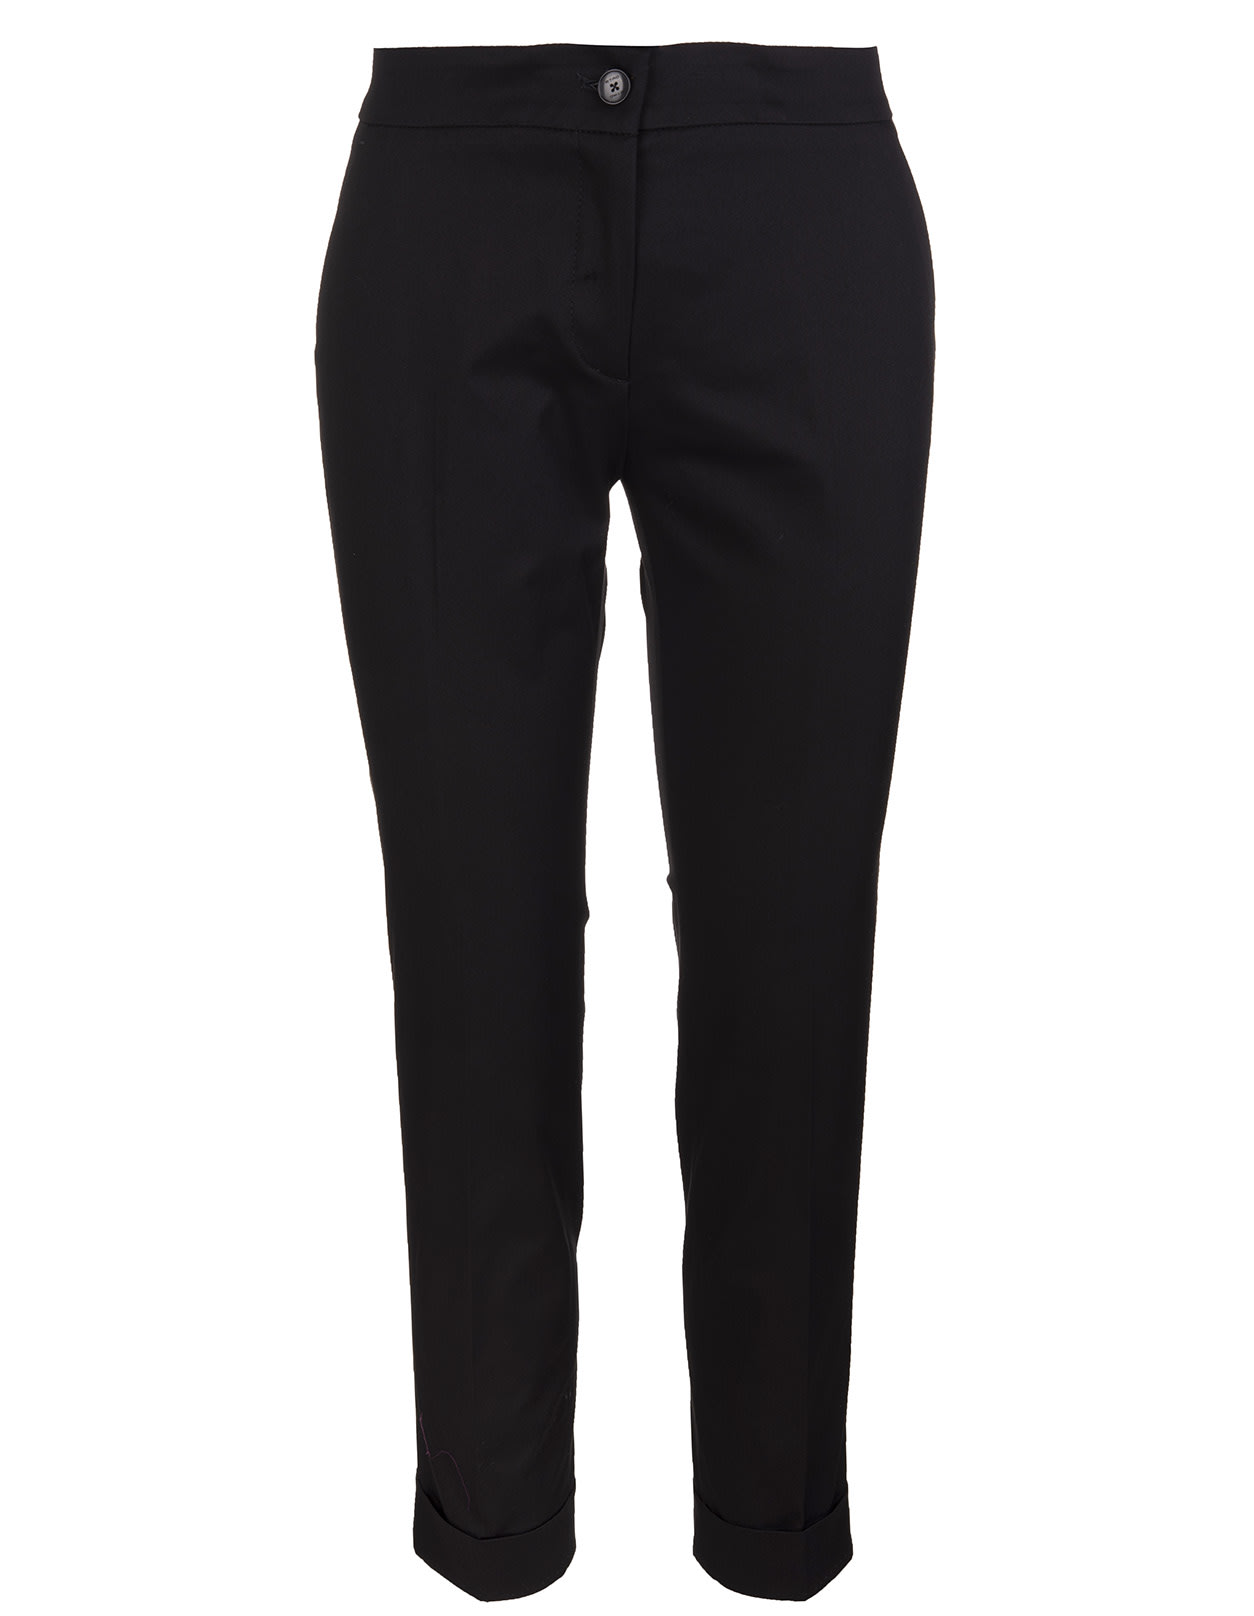 Etro Woman Black Tailored Trousers